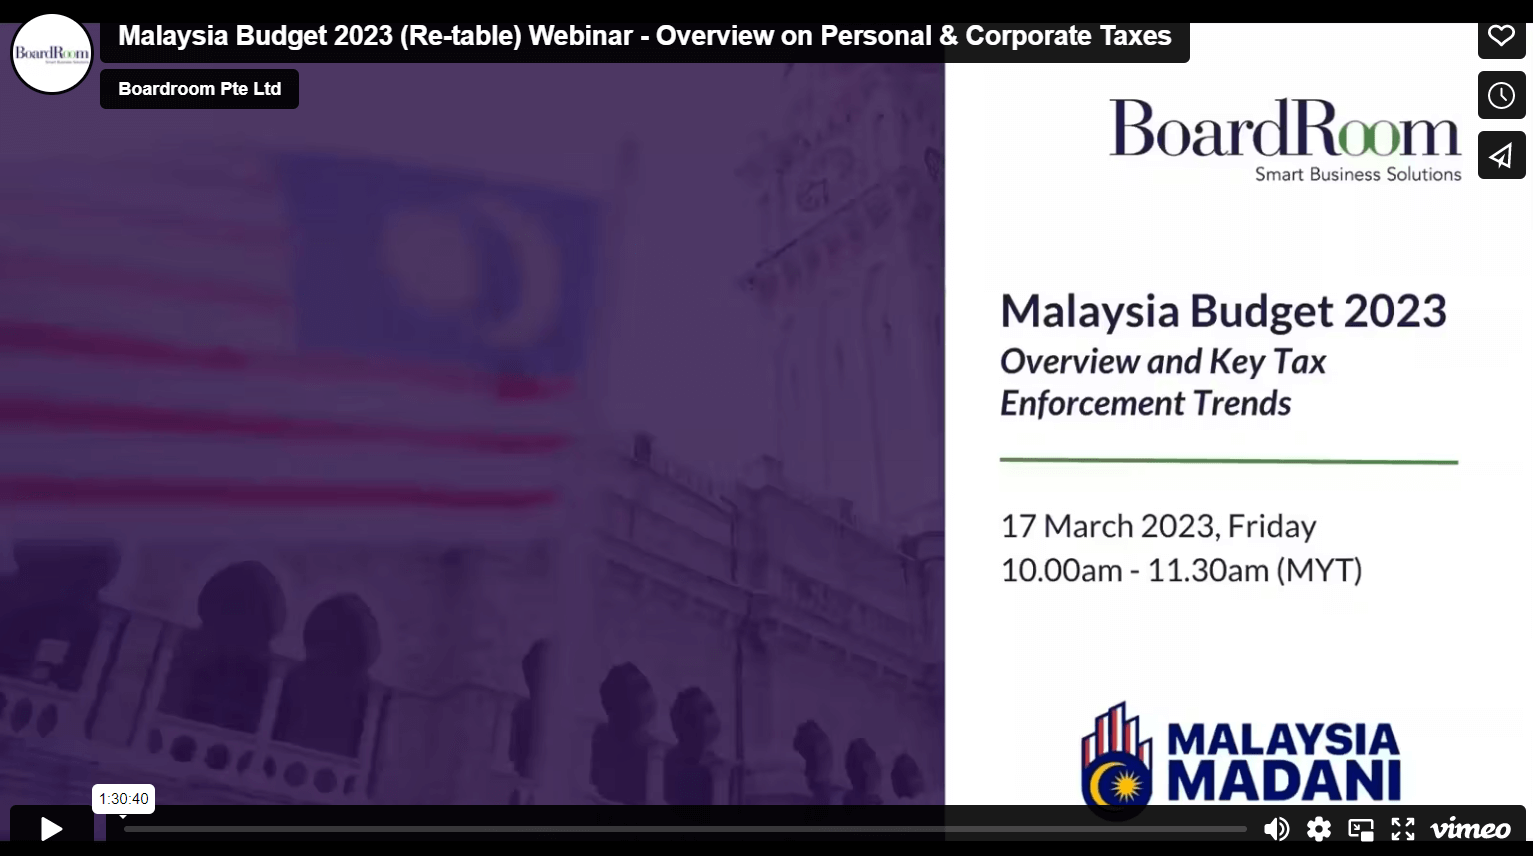 Malaysia Budget 2023 (Re-table) Webinar - Overview on Personal & Corporate Taxes thumbnail preview